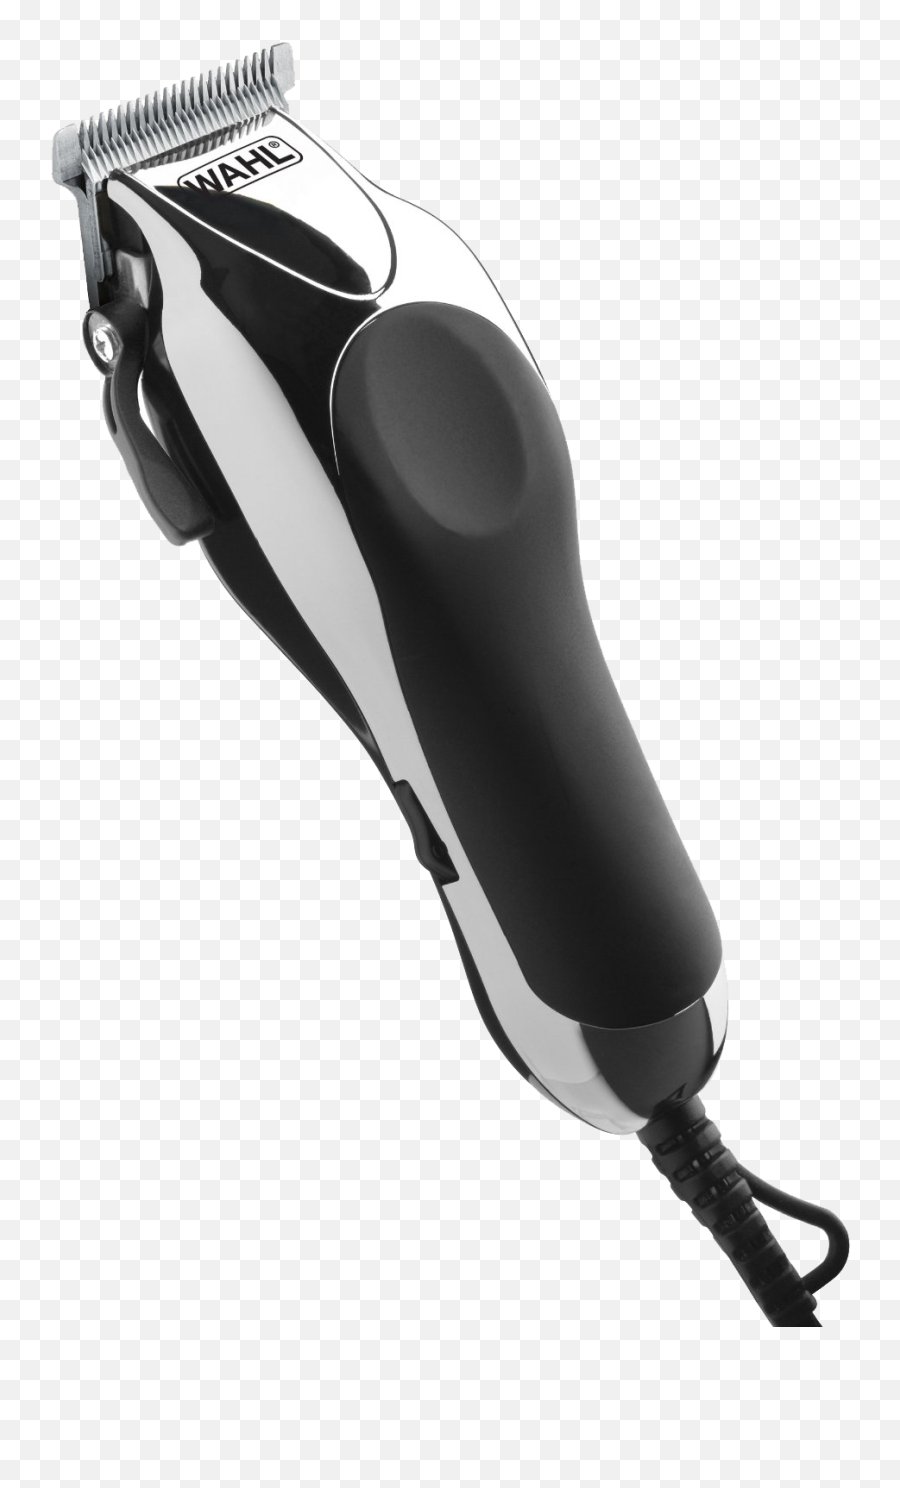 Hair Clippers Png Image With - Hair Clippers Png,Clipper Png